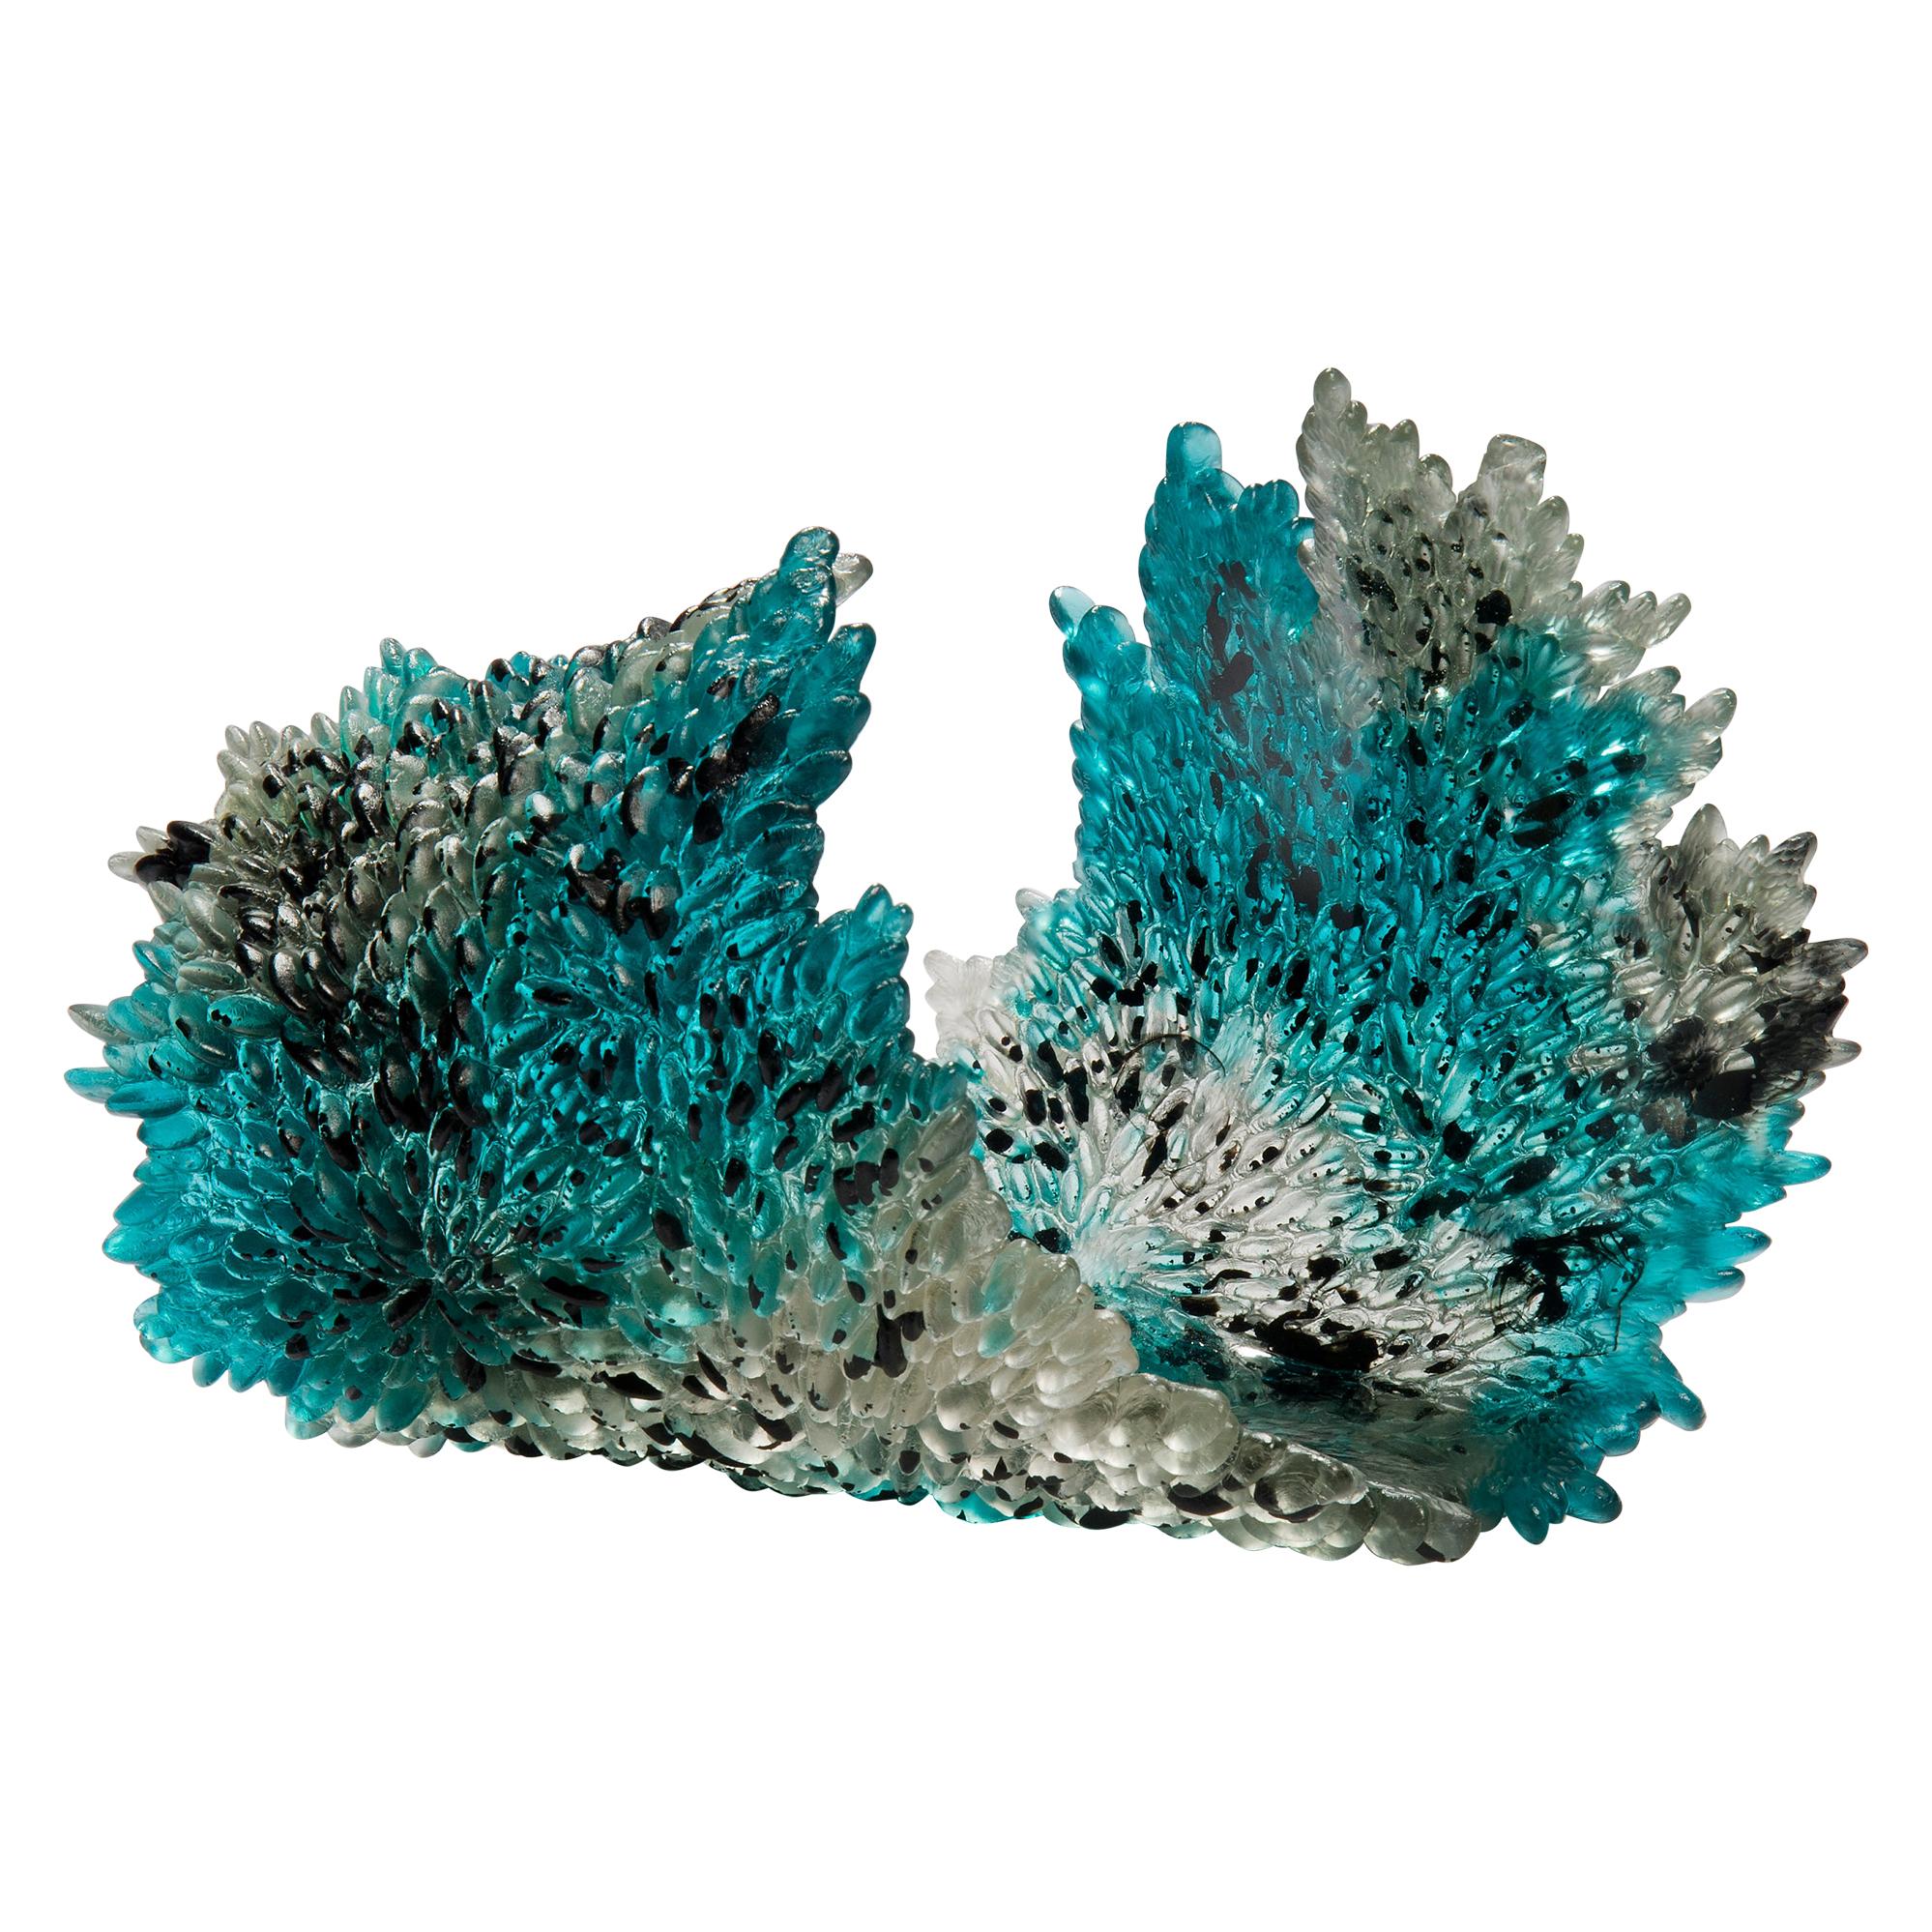 Acculturation, a Glass Sculpture in Clear, Teal and Black by Nina Casson McGarva